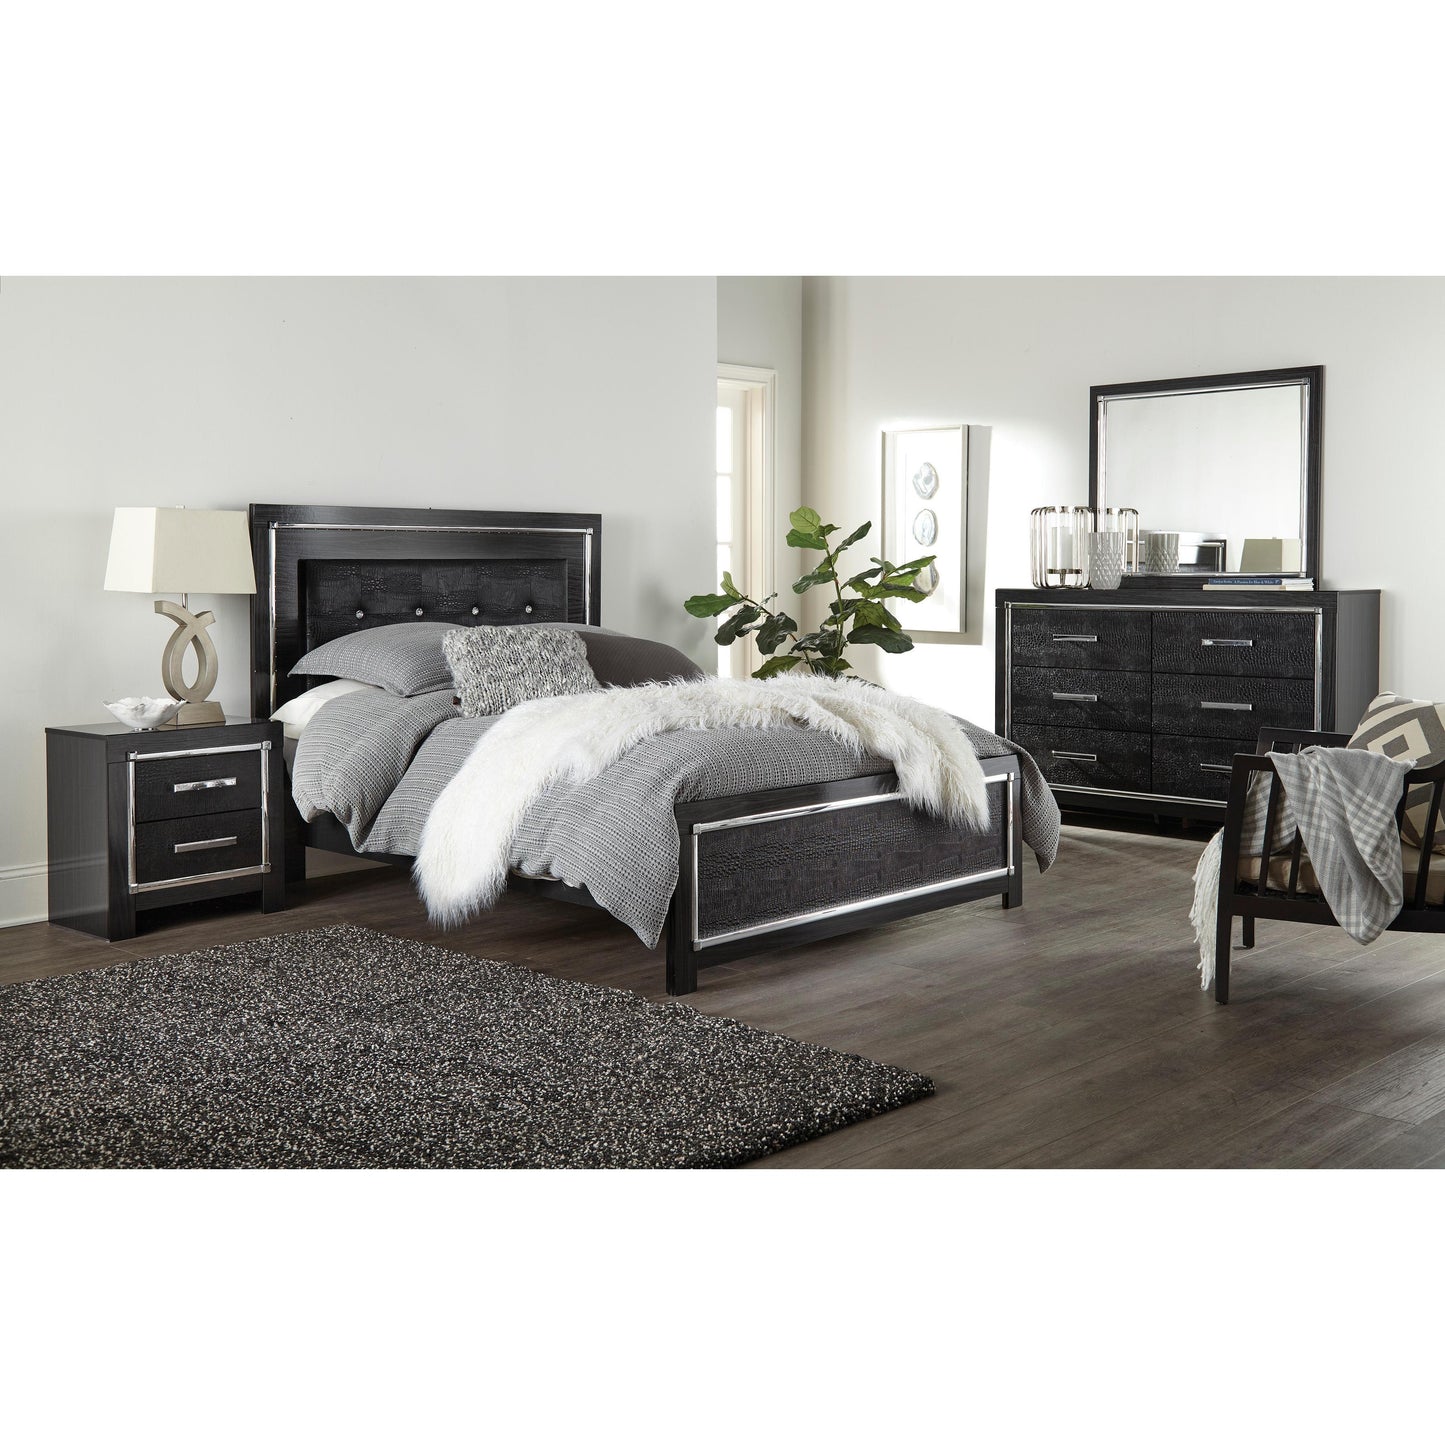 Signature Design by Ashley Kaydell B1420B34 6 pc Queen Panel Bedroom Set IMAGE 1